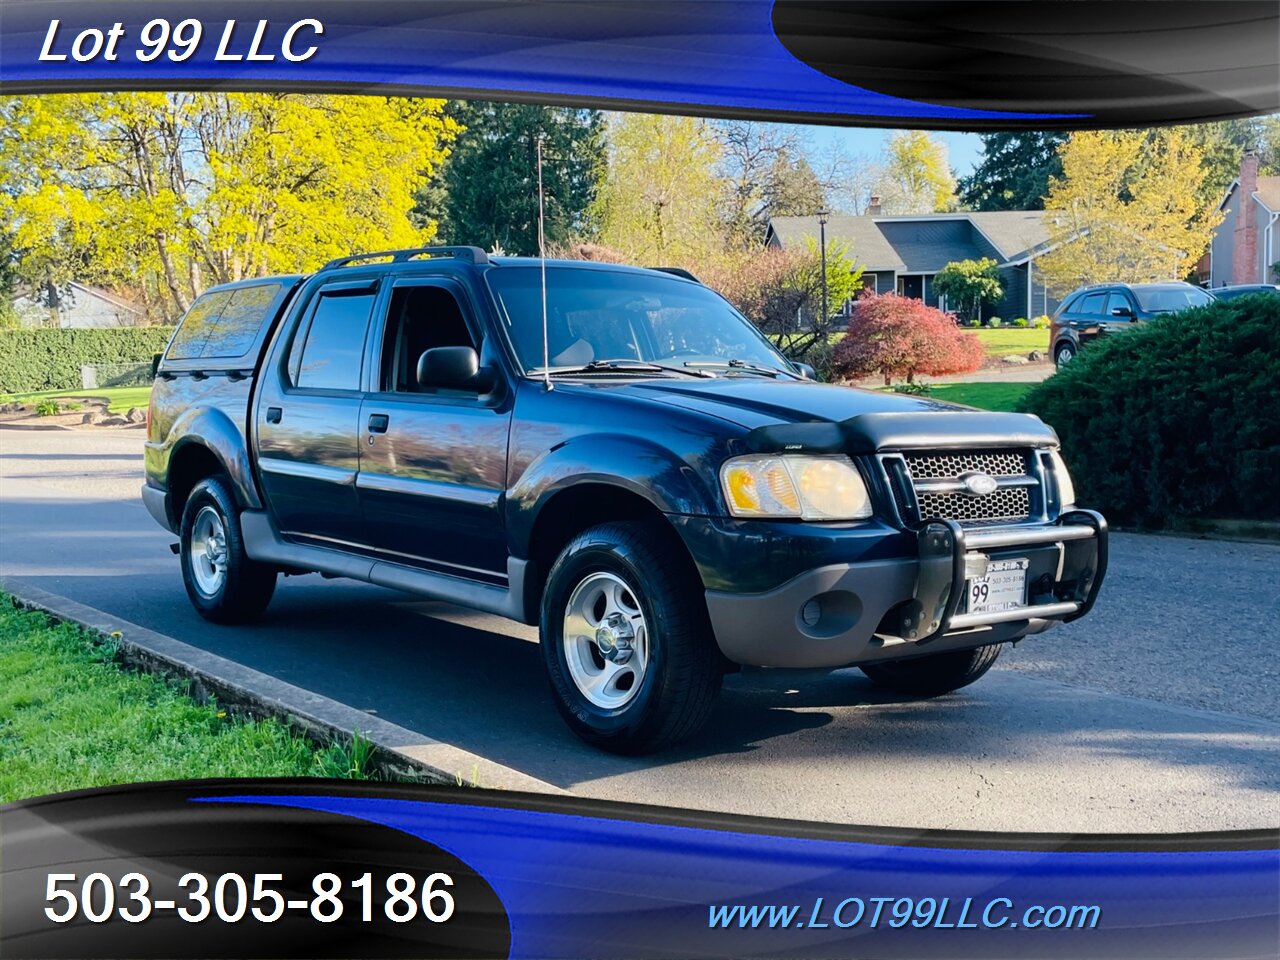 2003 Ford Explorer Sport Trac XLS 4x4  1-OWNER 117k  NEW TIRES  Canopy   - Photo 6 - Milwaukie, OR 97267